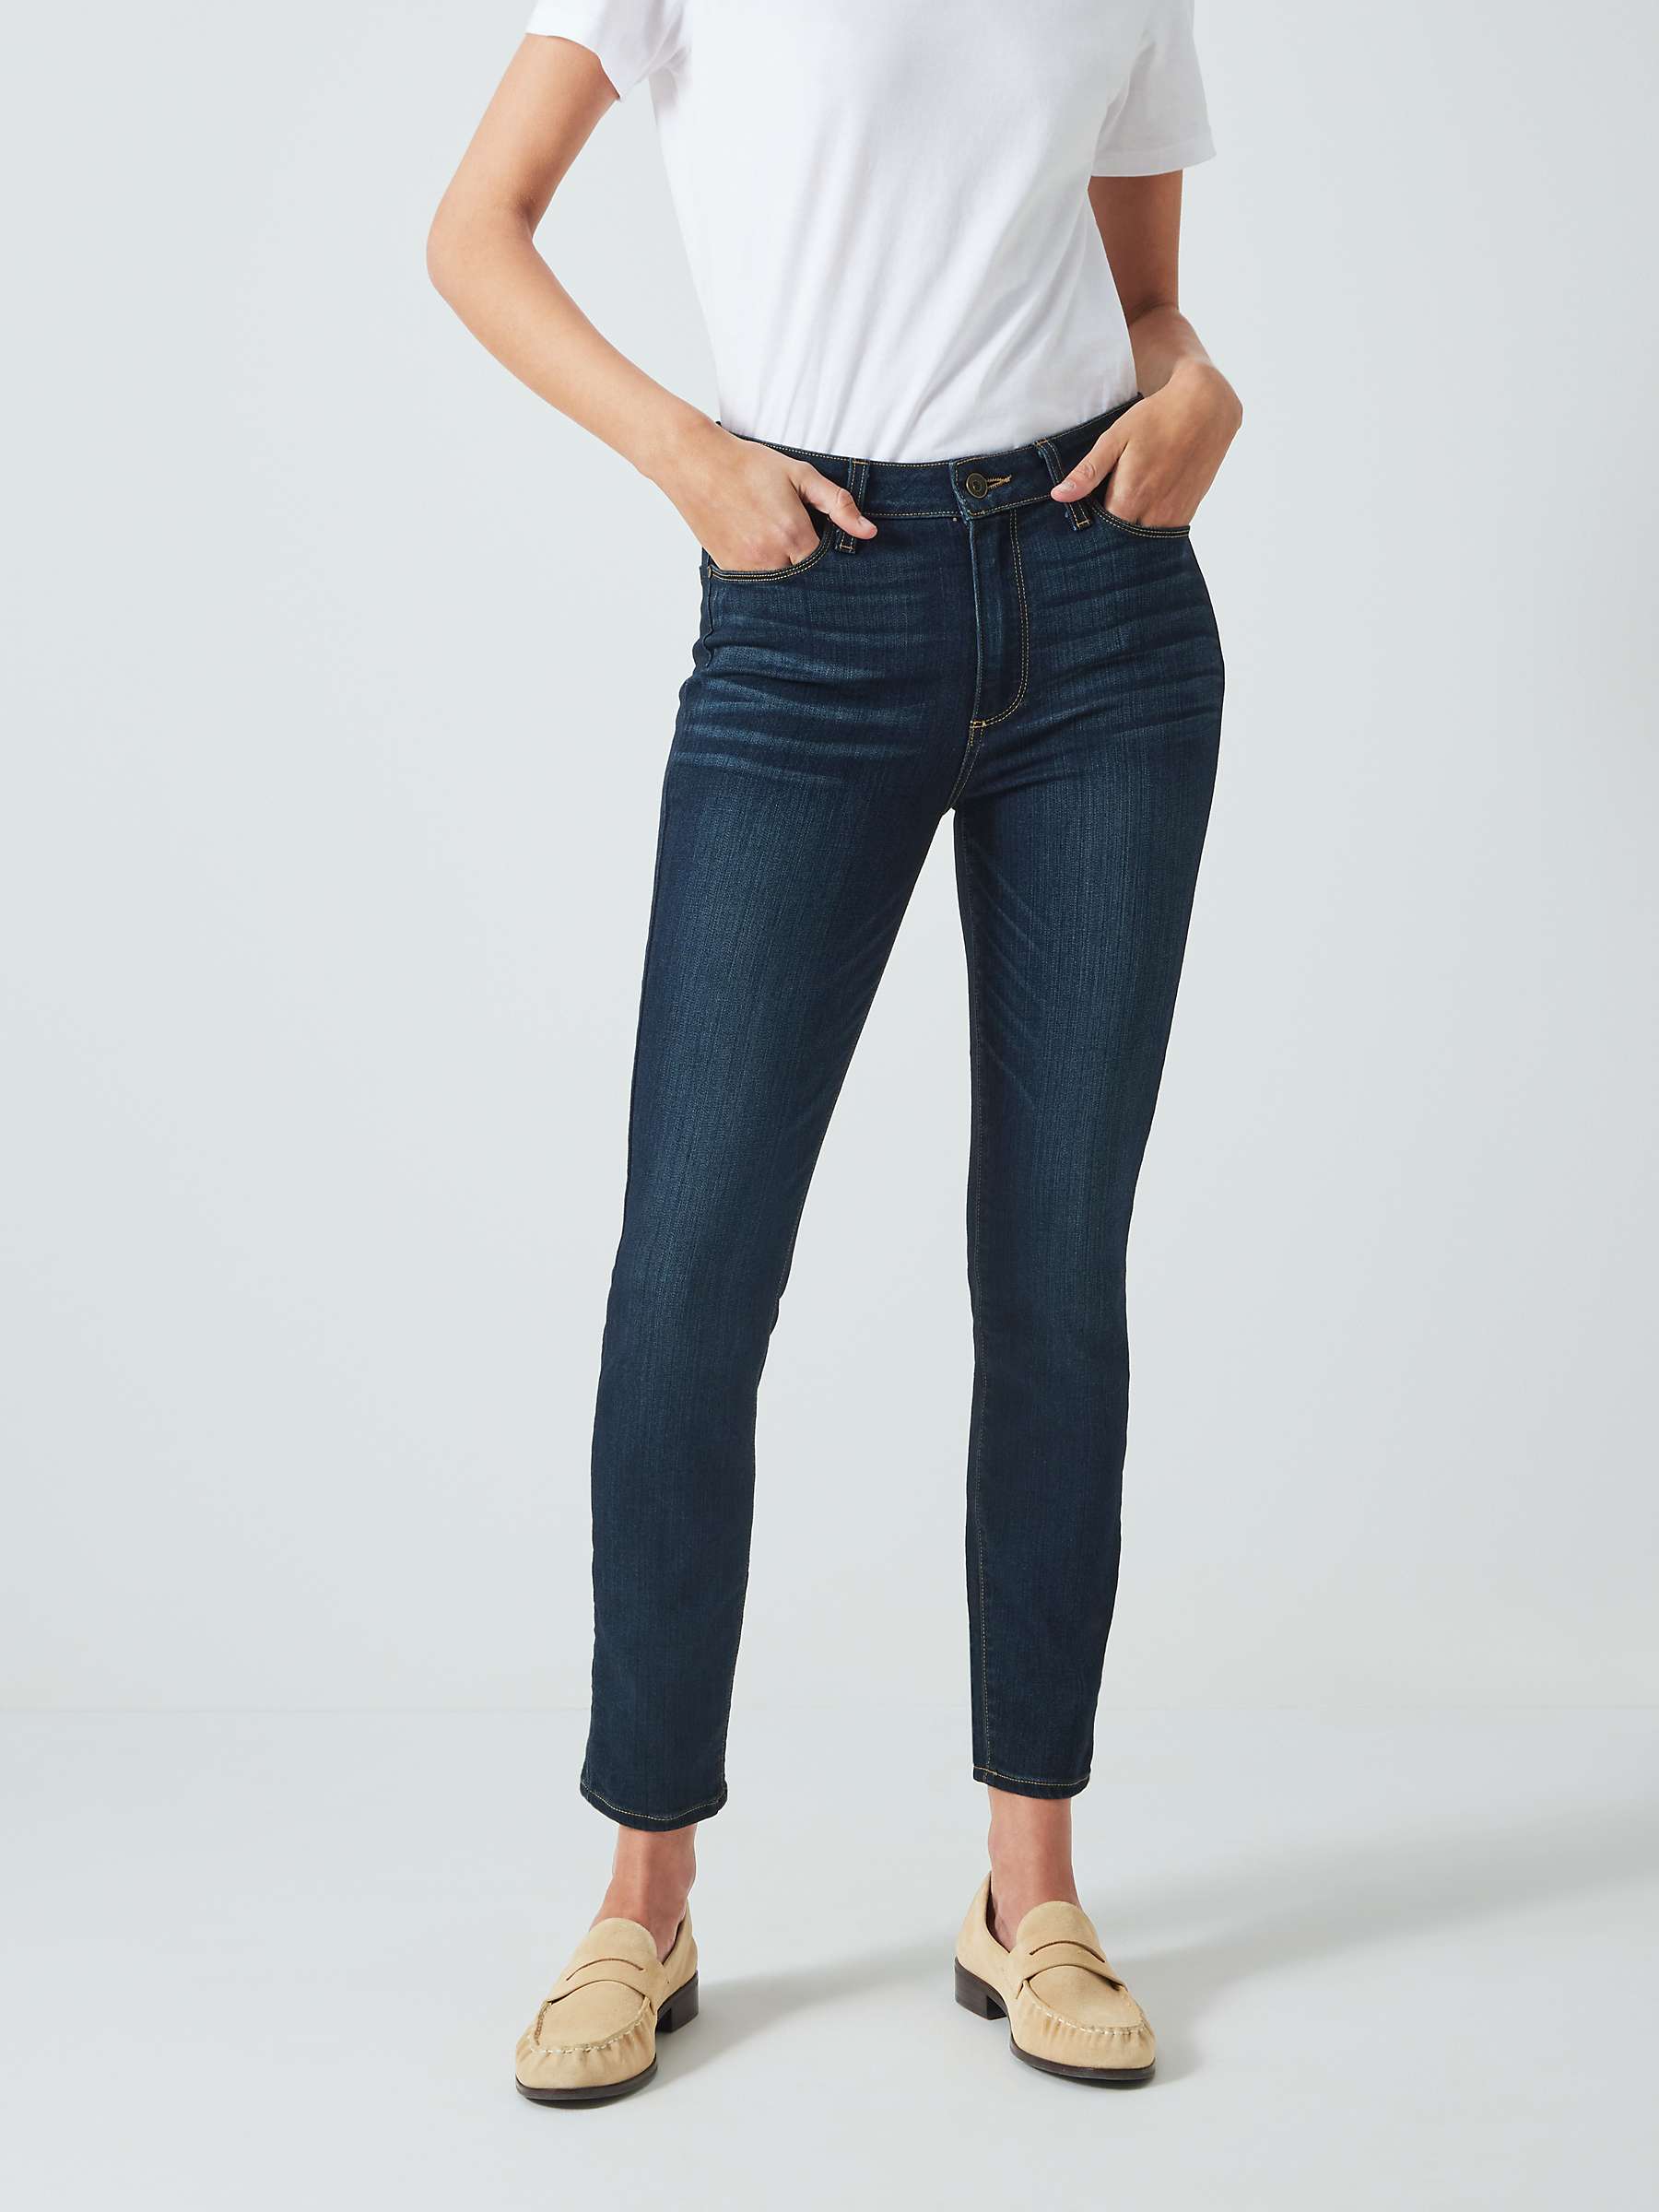 Buy PAIGE The Hoxton Skinny Ankle Jeans, Blue Online at johnlewis.com